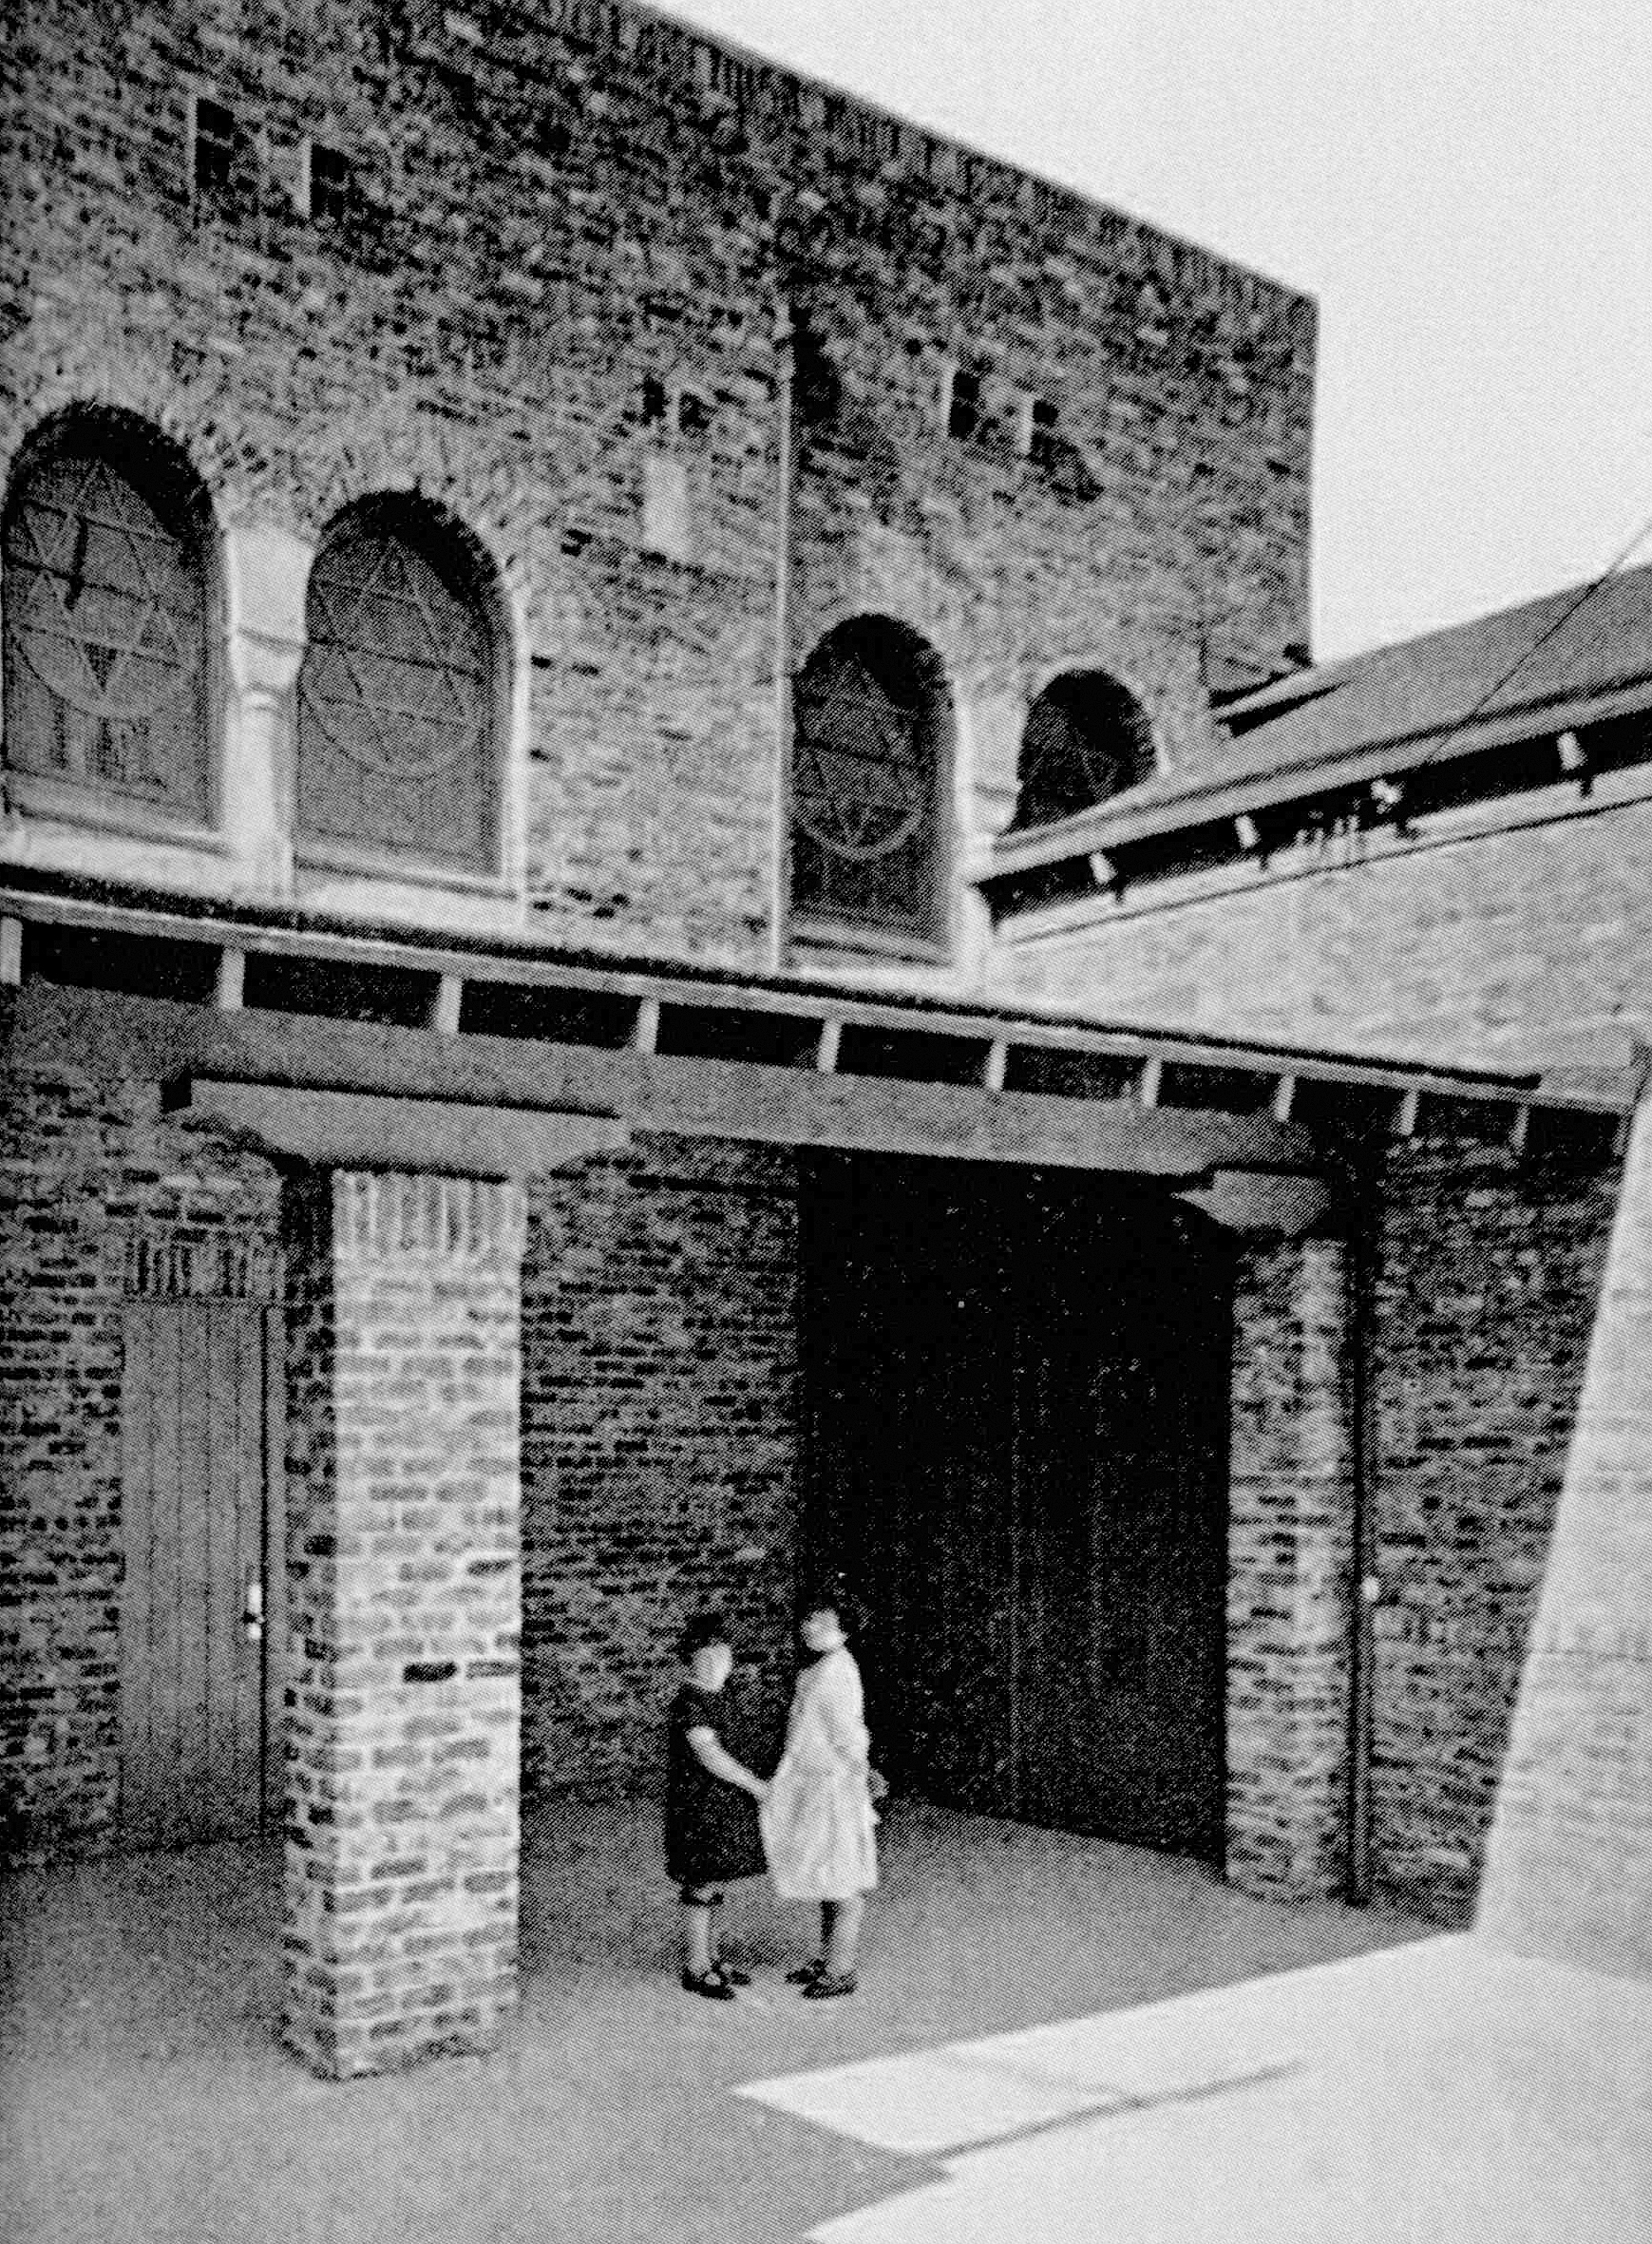 A black and white historical picture shows two people standing outside the Alper Memorial Building, the Jewish synagogue.